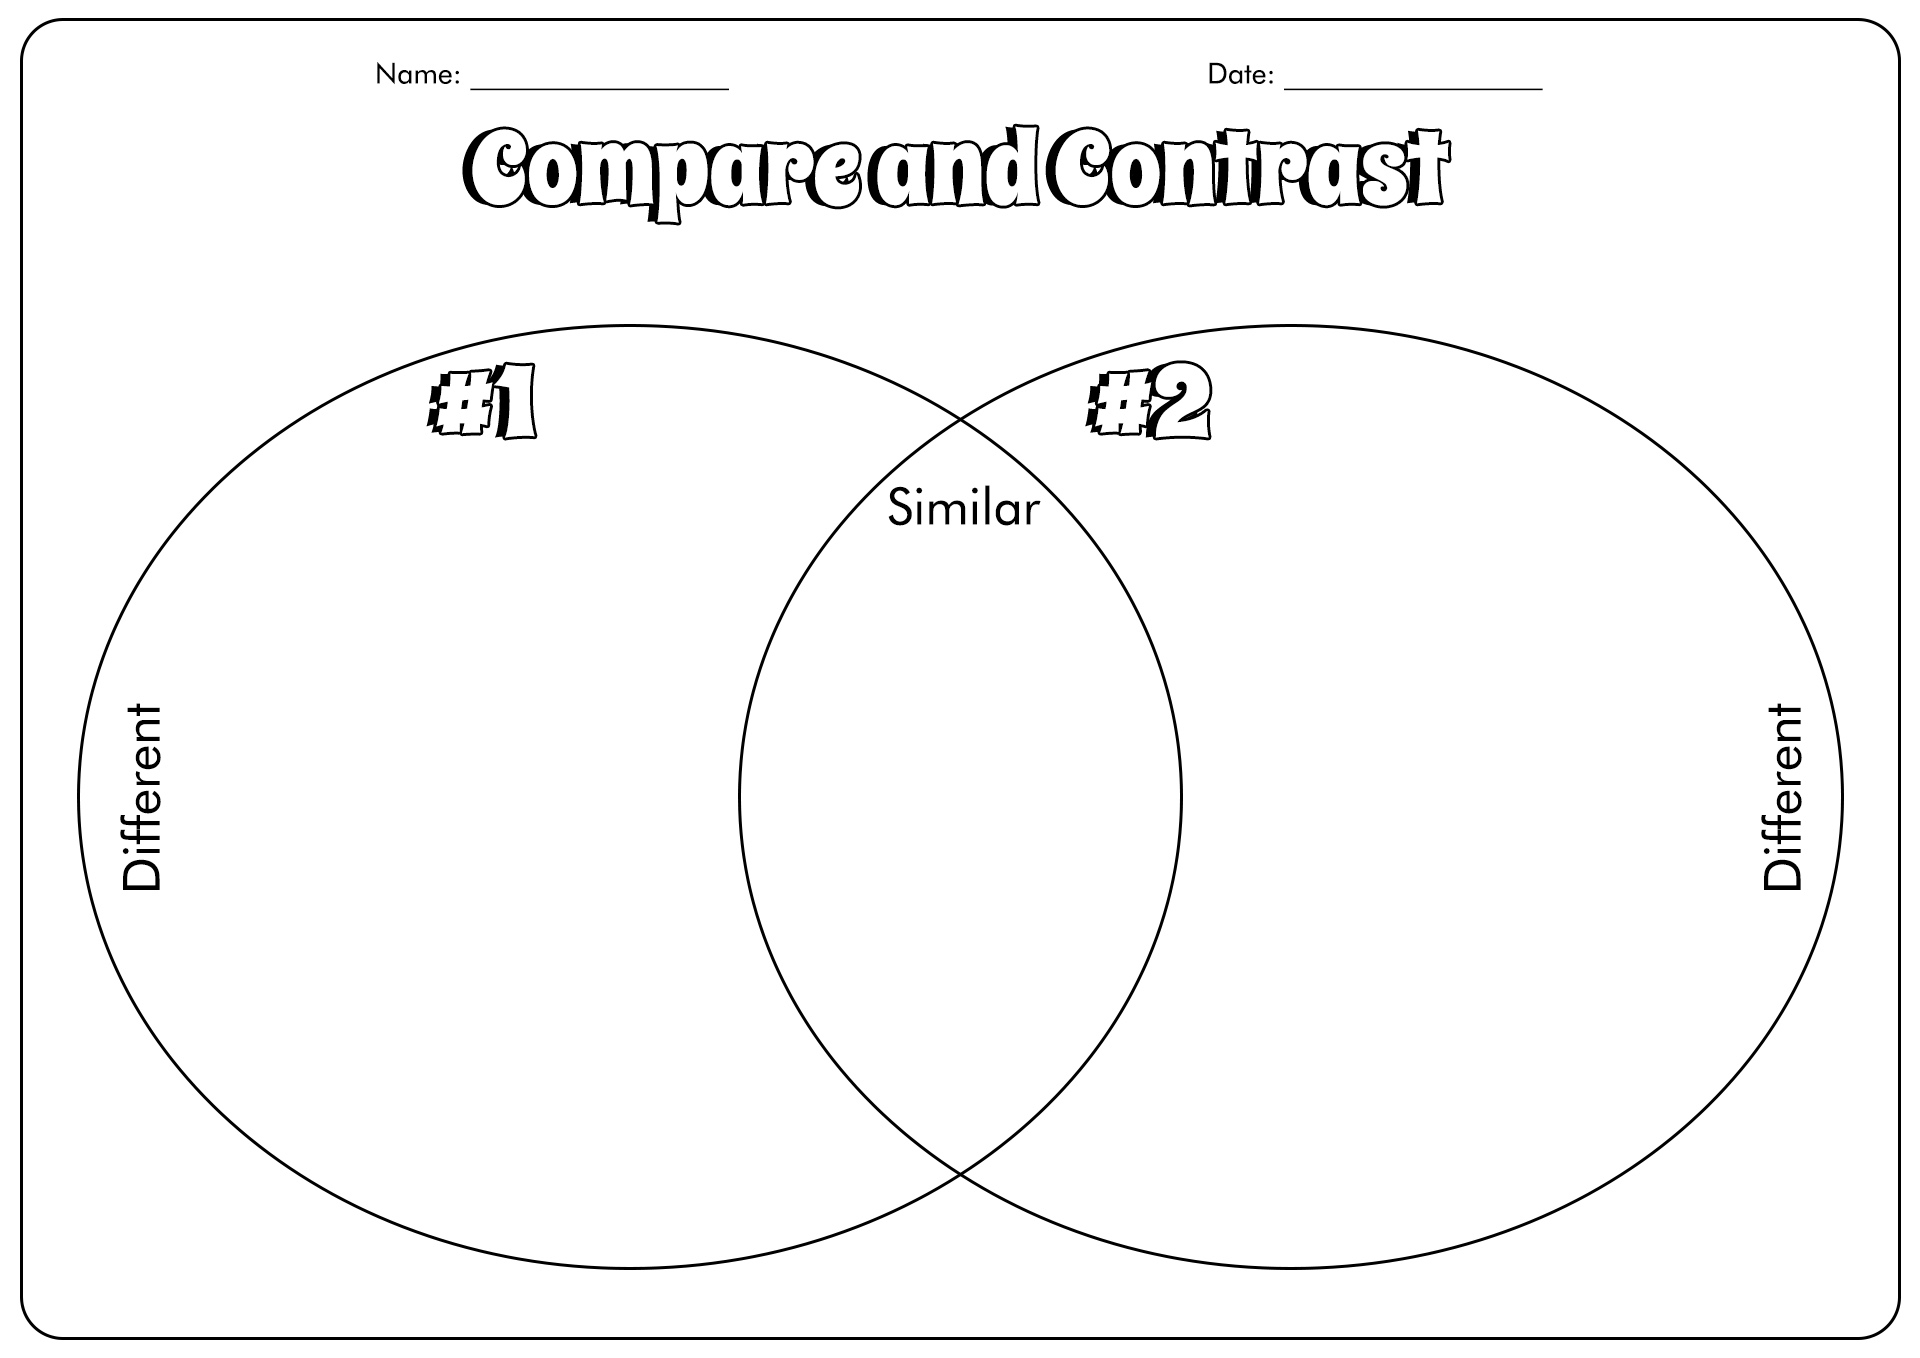 15-best-images-of-blank-compare-and-contrast-worksheets-compare-and-contrast-essay-worksheet